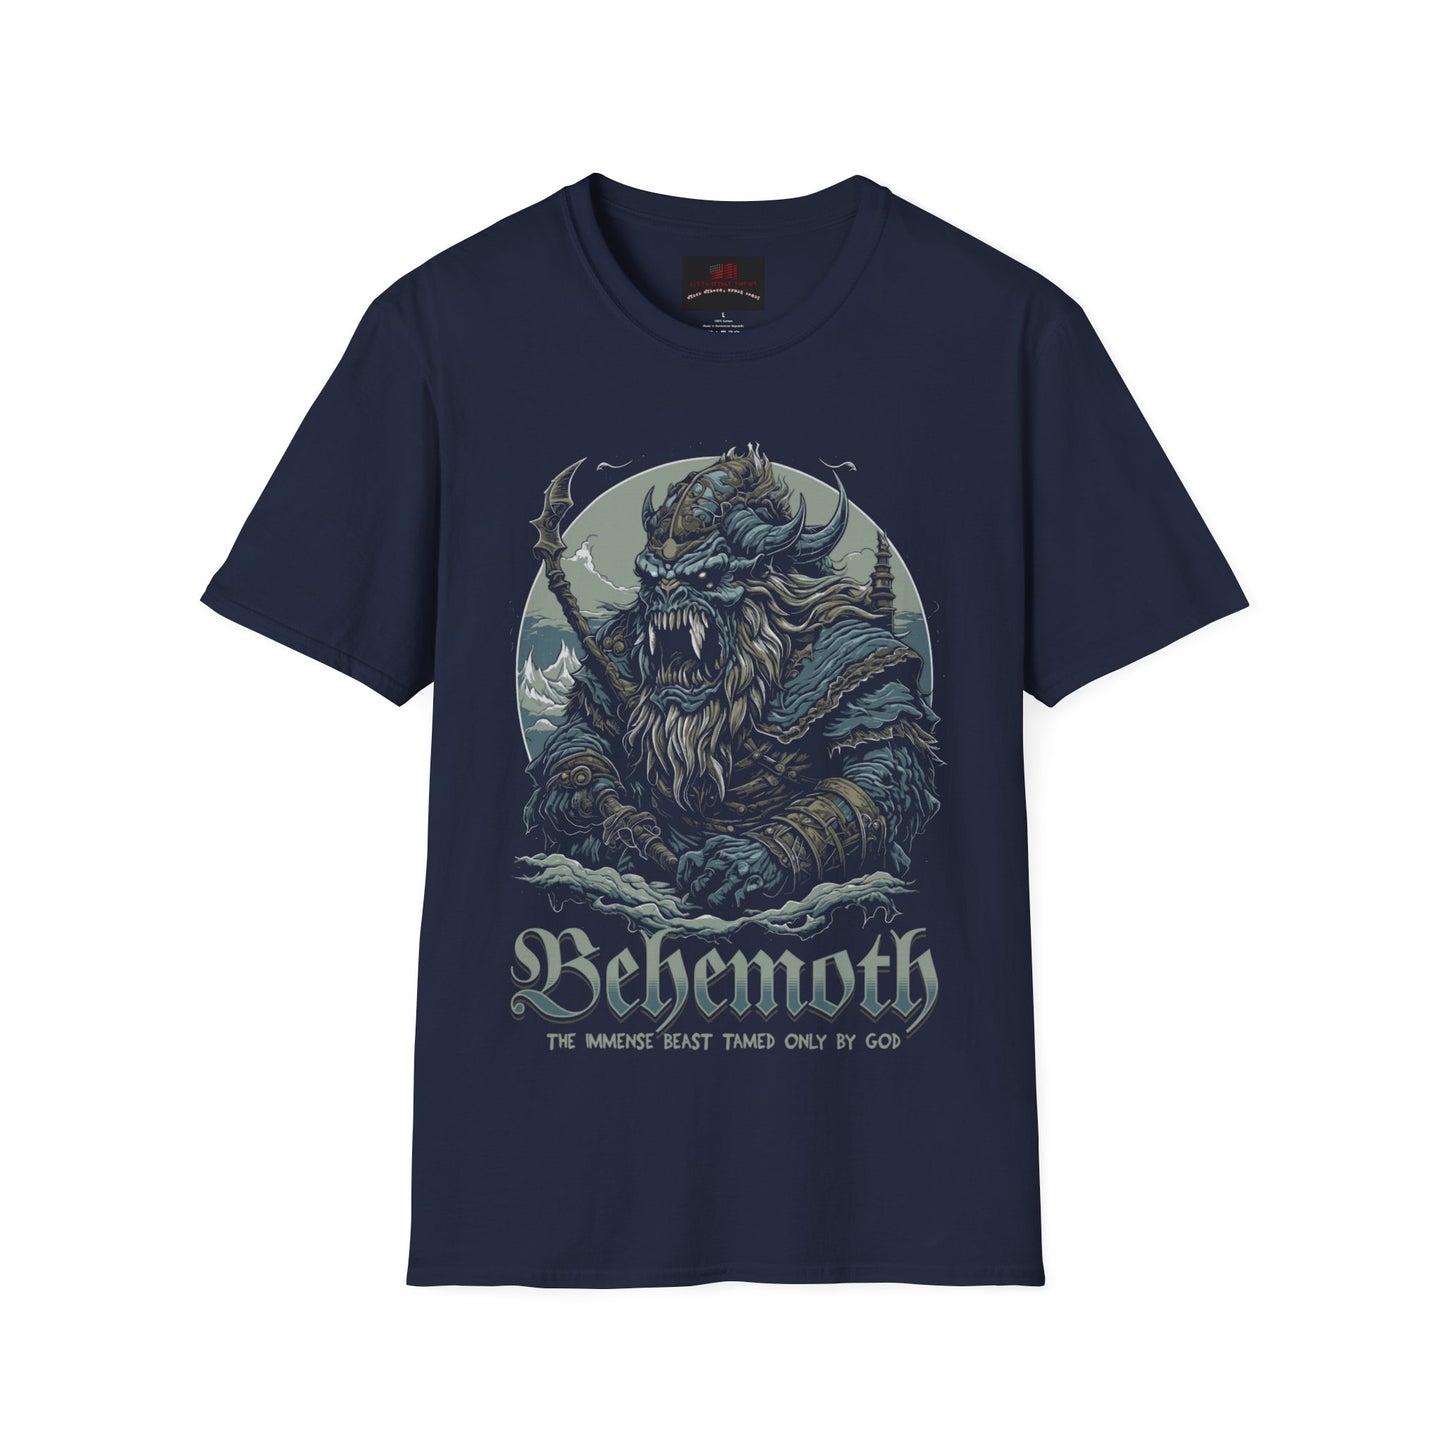 Behemoth Tamed Only By God Unisex Softstyle T-Shirt